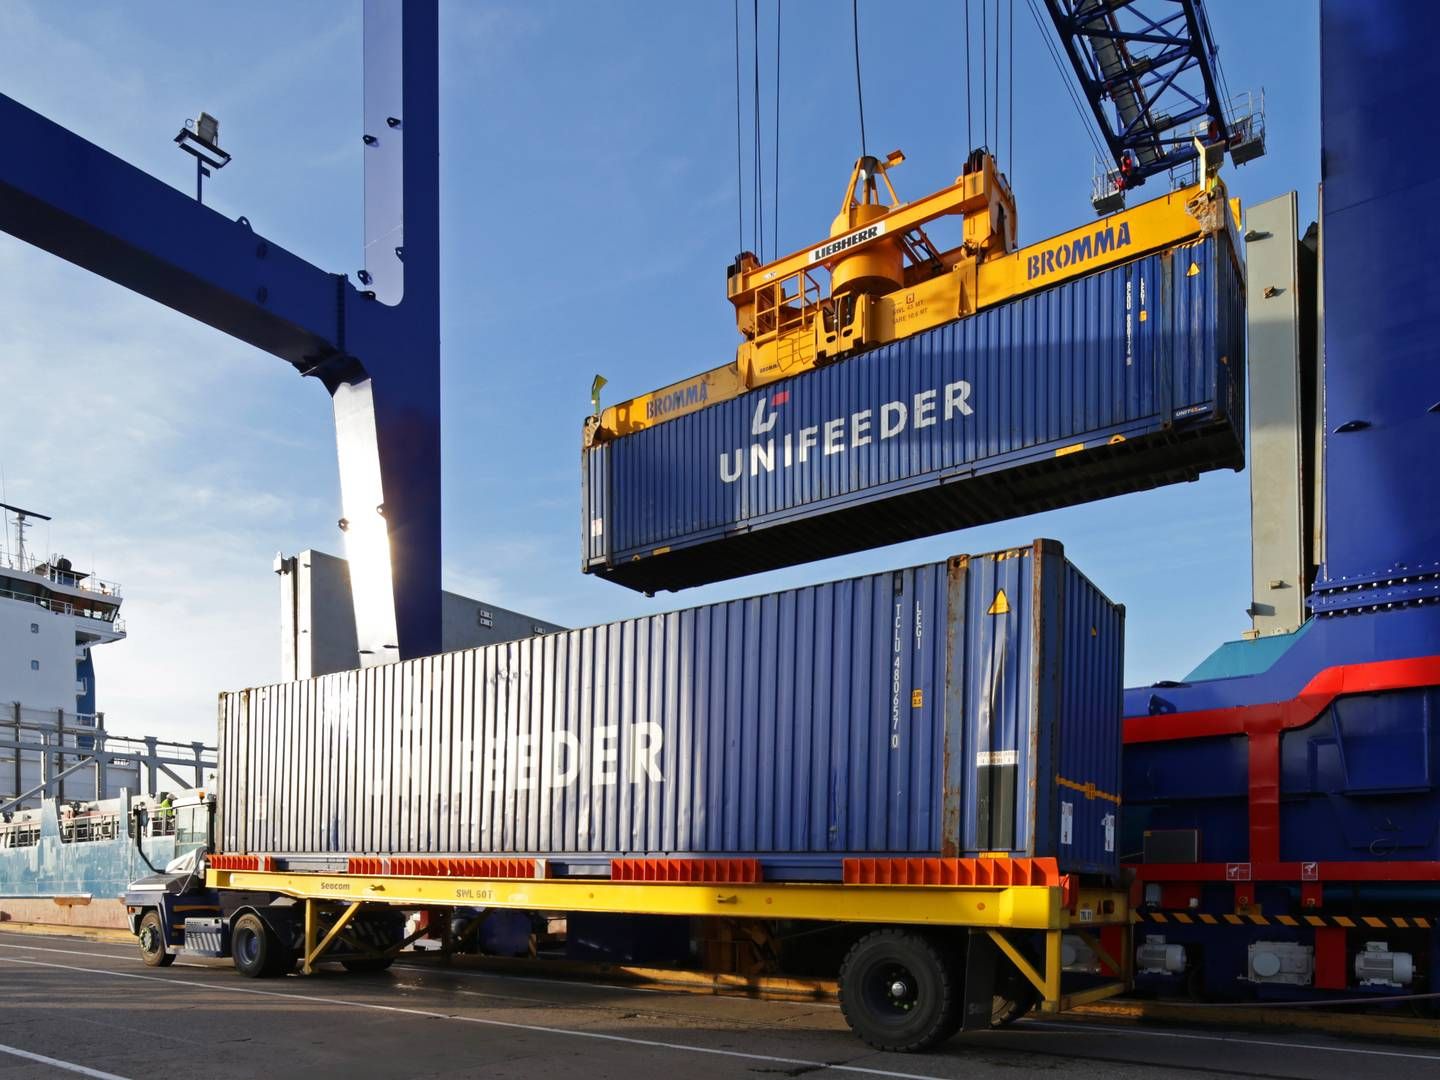 Unifeeder is headquartered on the port of Aarhus and makes a living by picking containers up in major ports and sailing them off to smaller ports where major carriers don't go. | Photo: Unifeeder